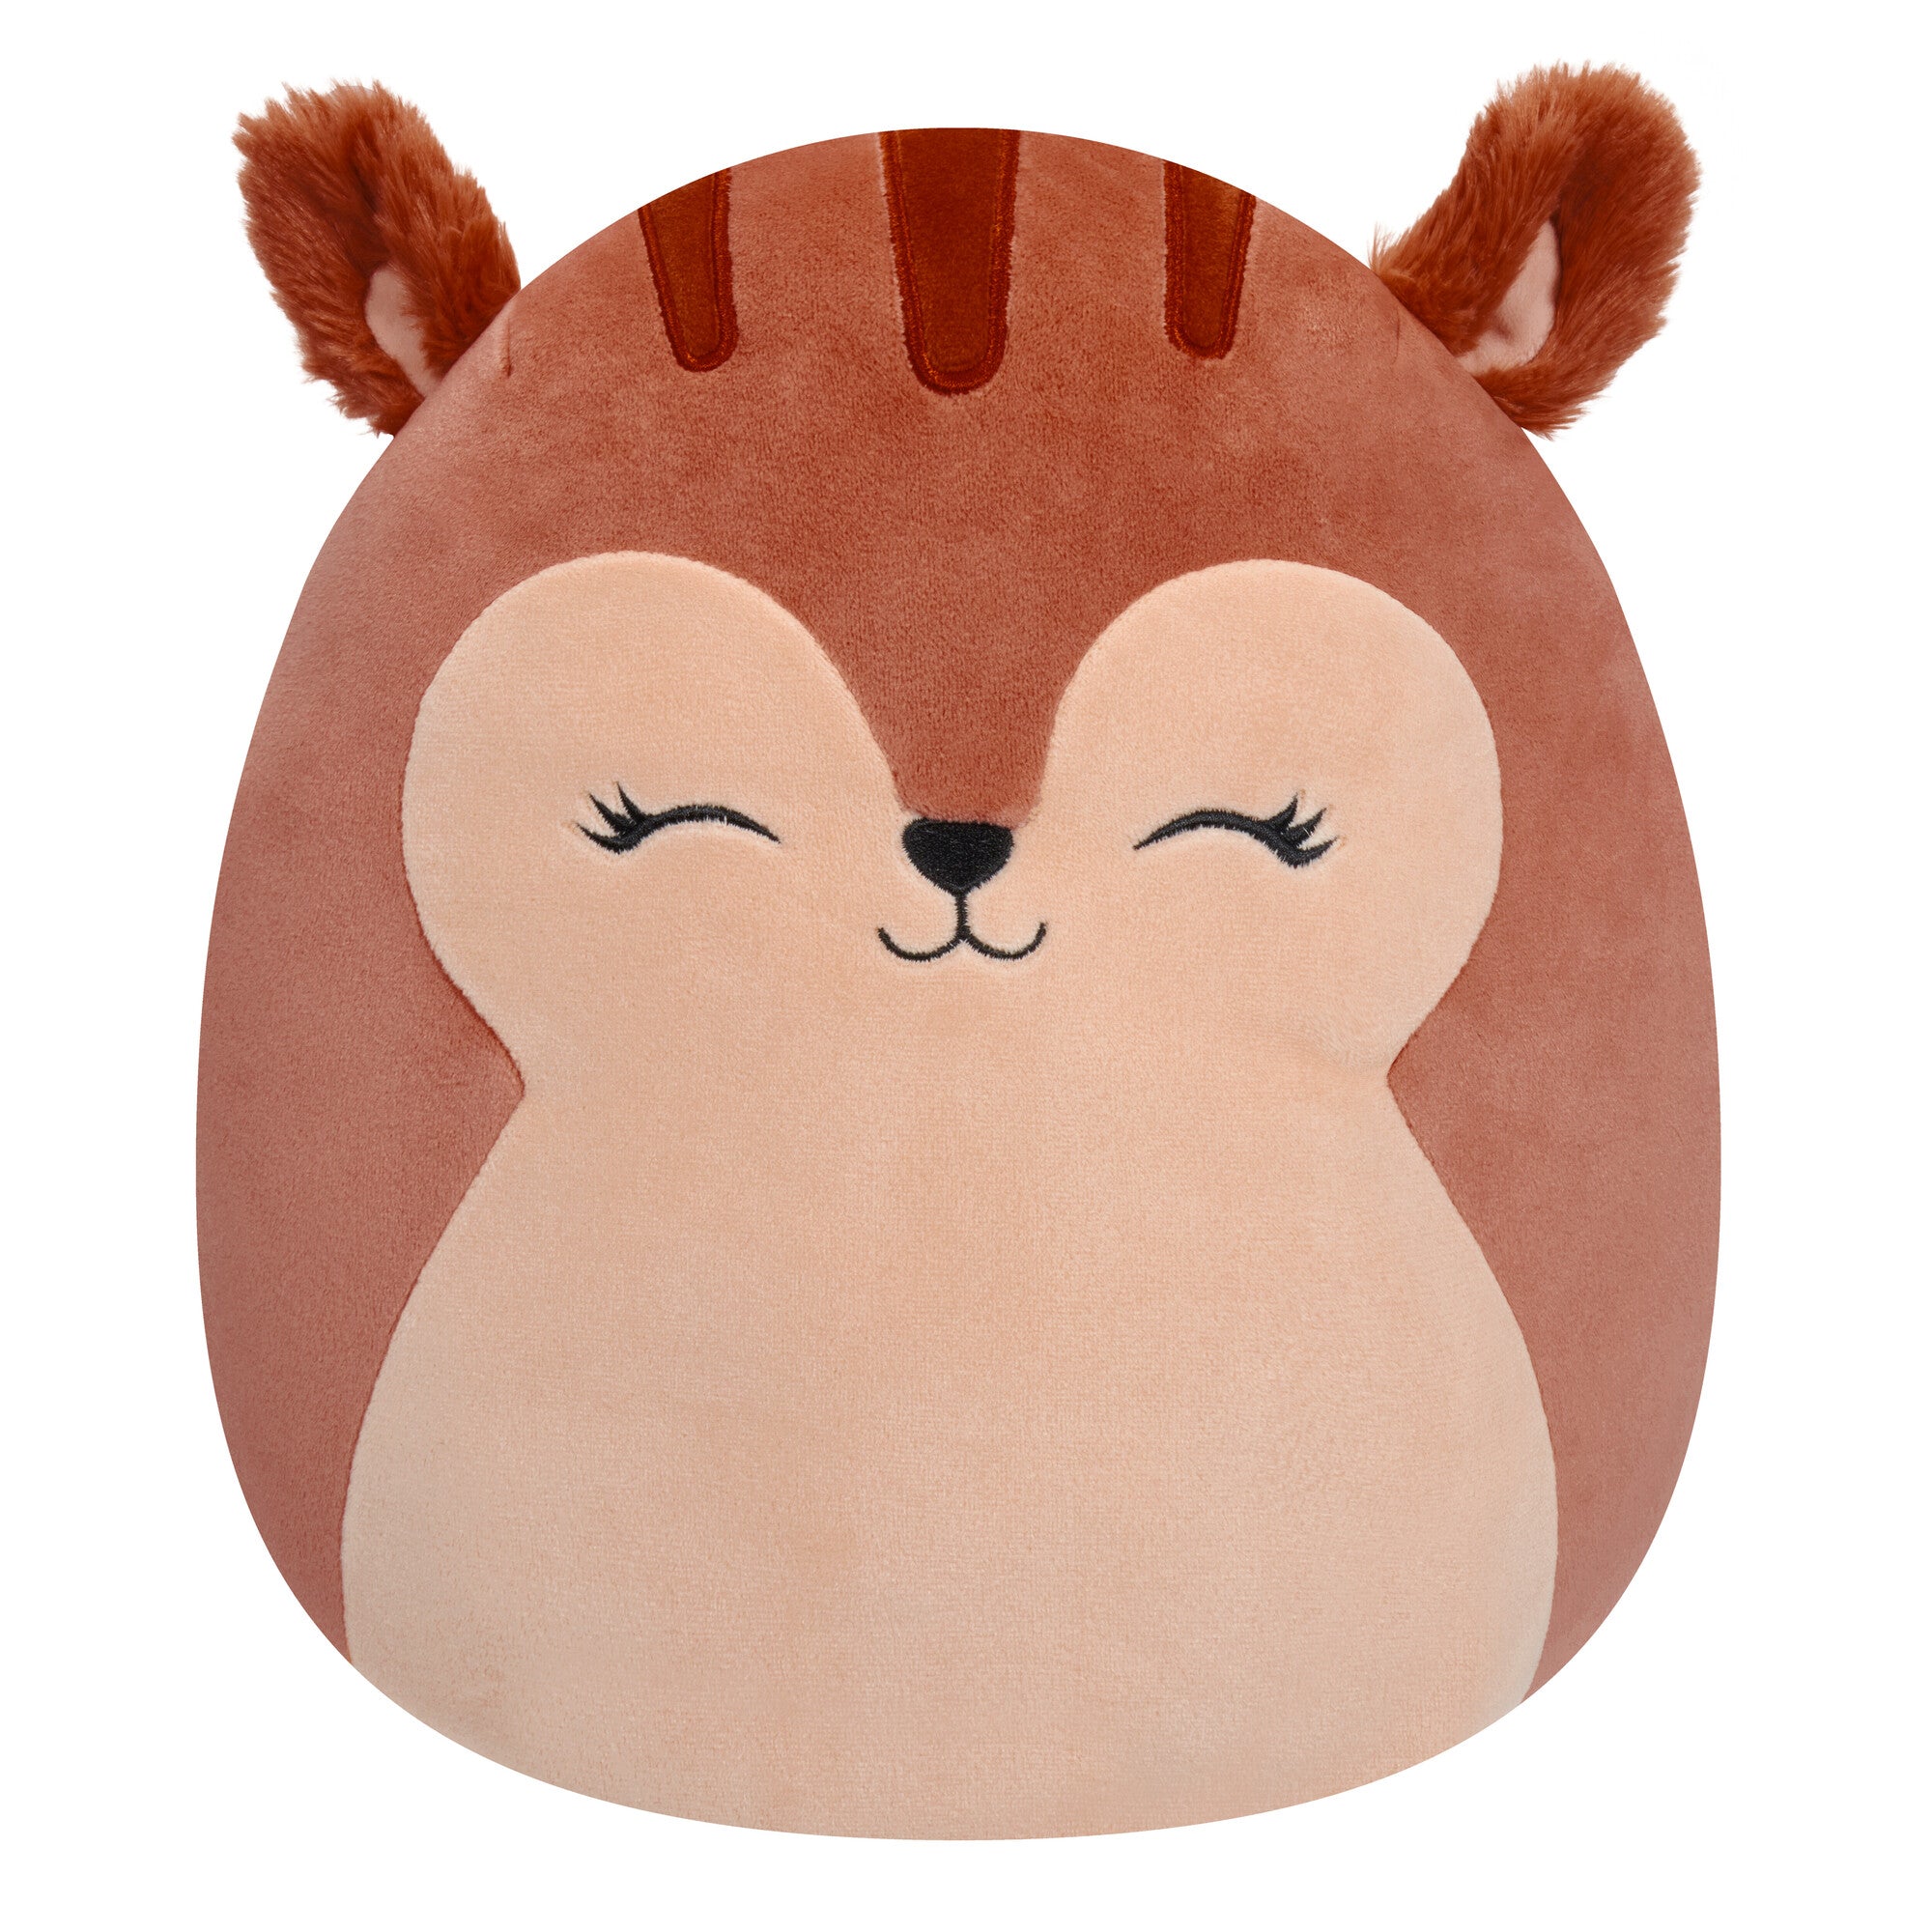 Plush pillow-like toy of a smiling squirrel